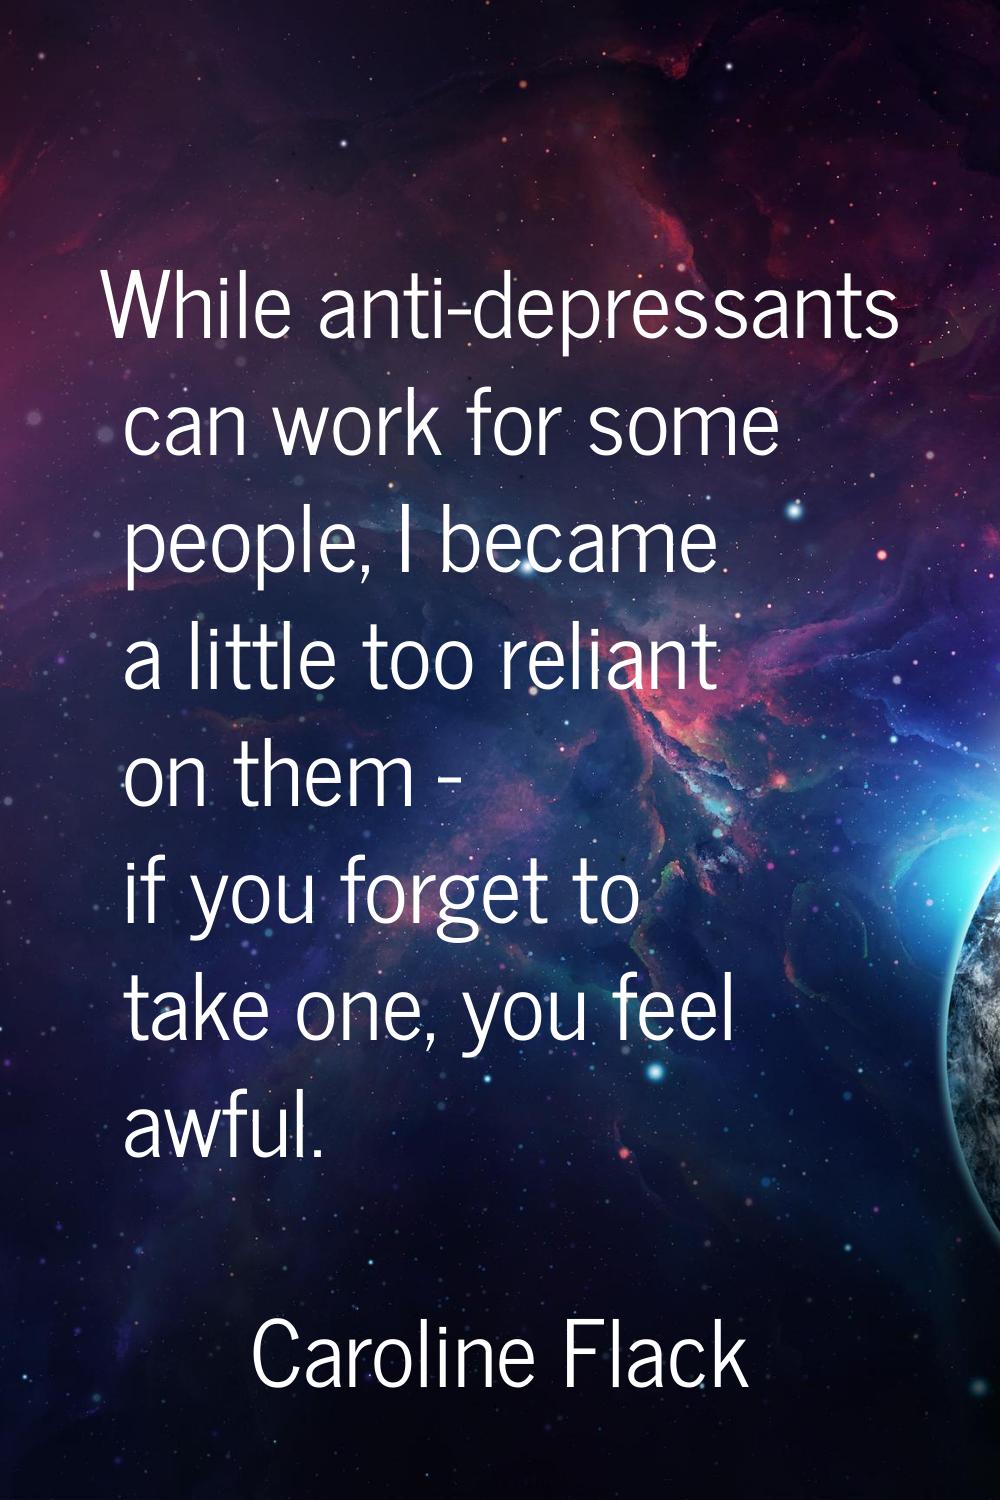 While anti-depressants can work for some people, I became a little too reliant on them - if you for